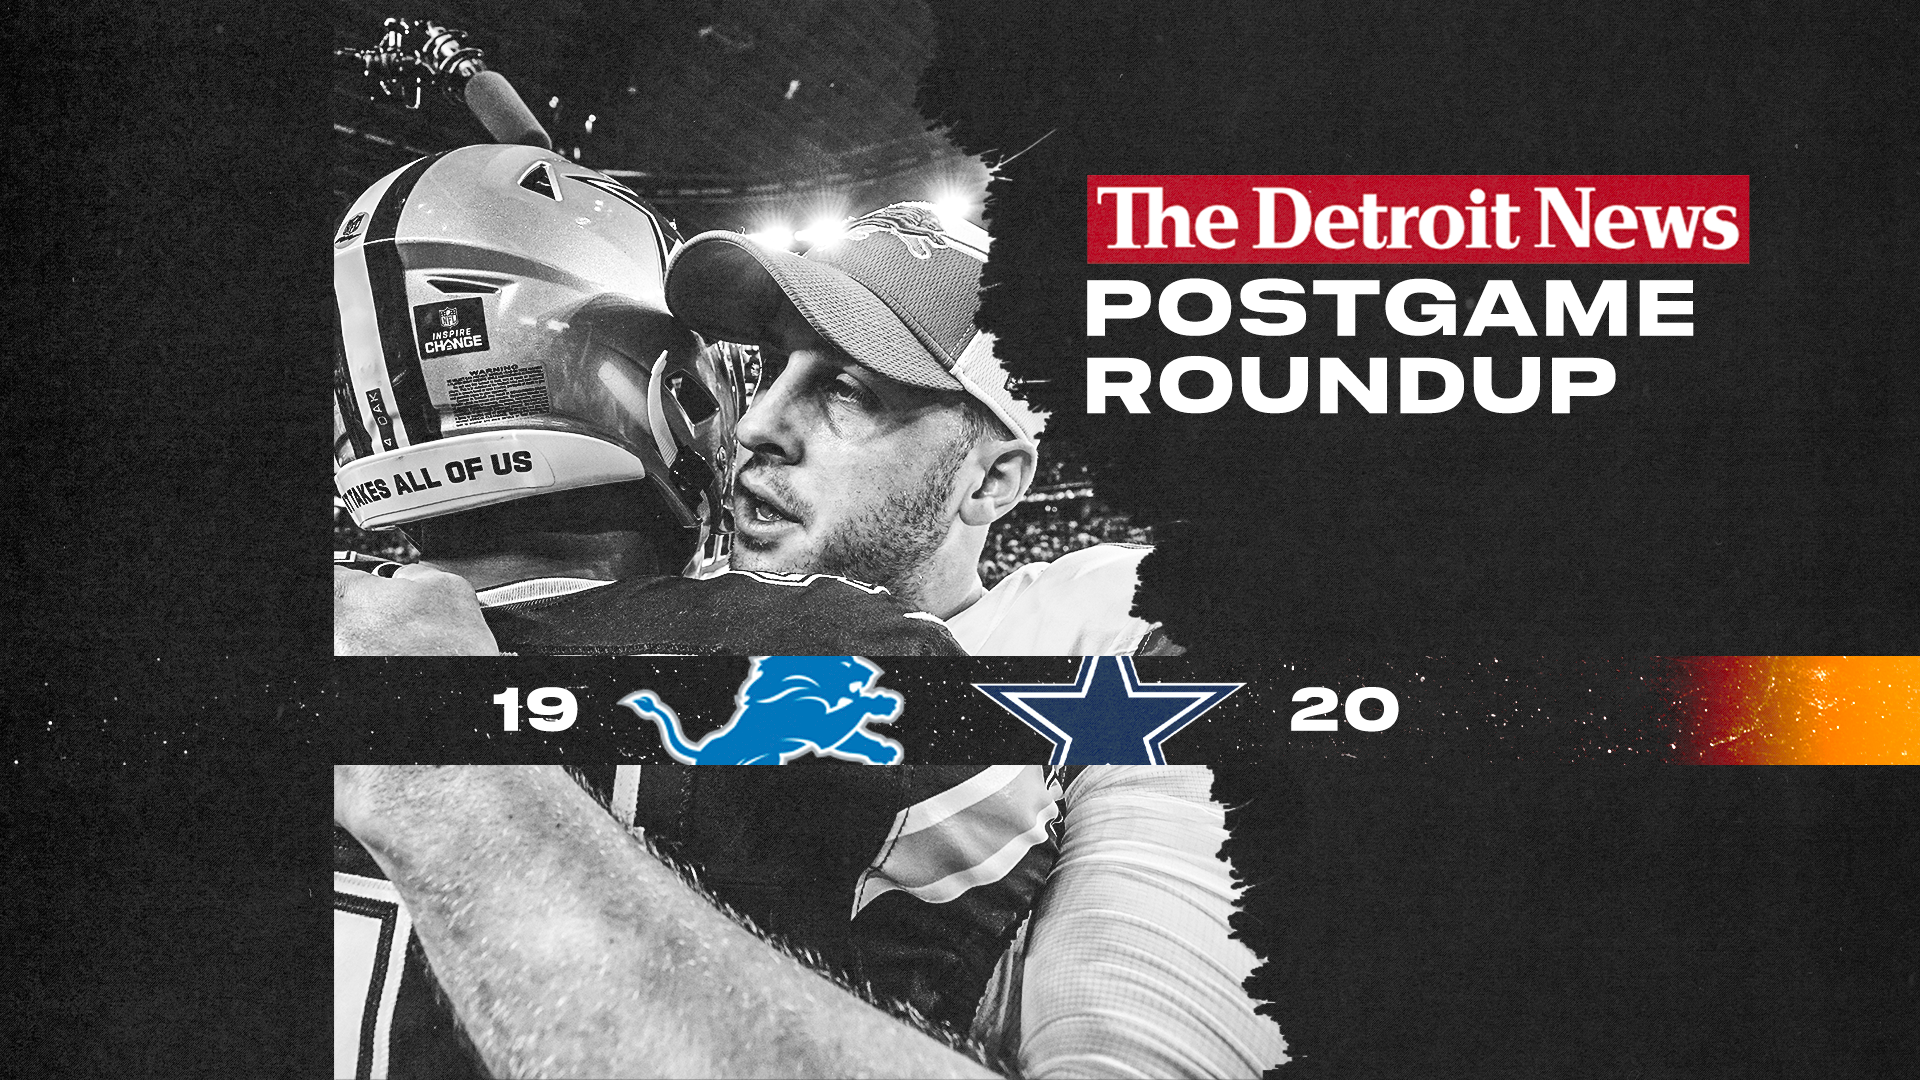 Here's a roundup of all of The Detroit News' coverage from the Detroit Lions' 20-19 loss to the Dallas Cowboys on Saturday at AT&T Stadium.